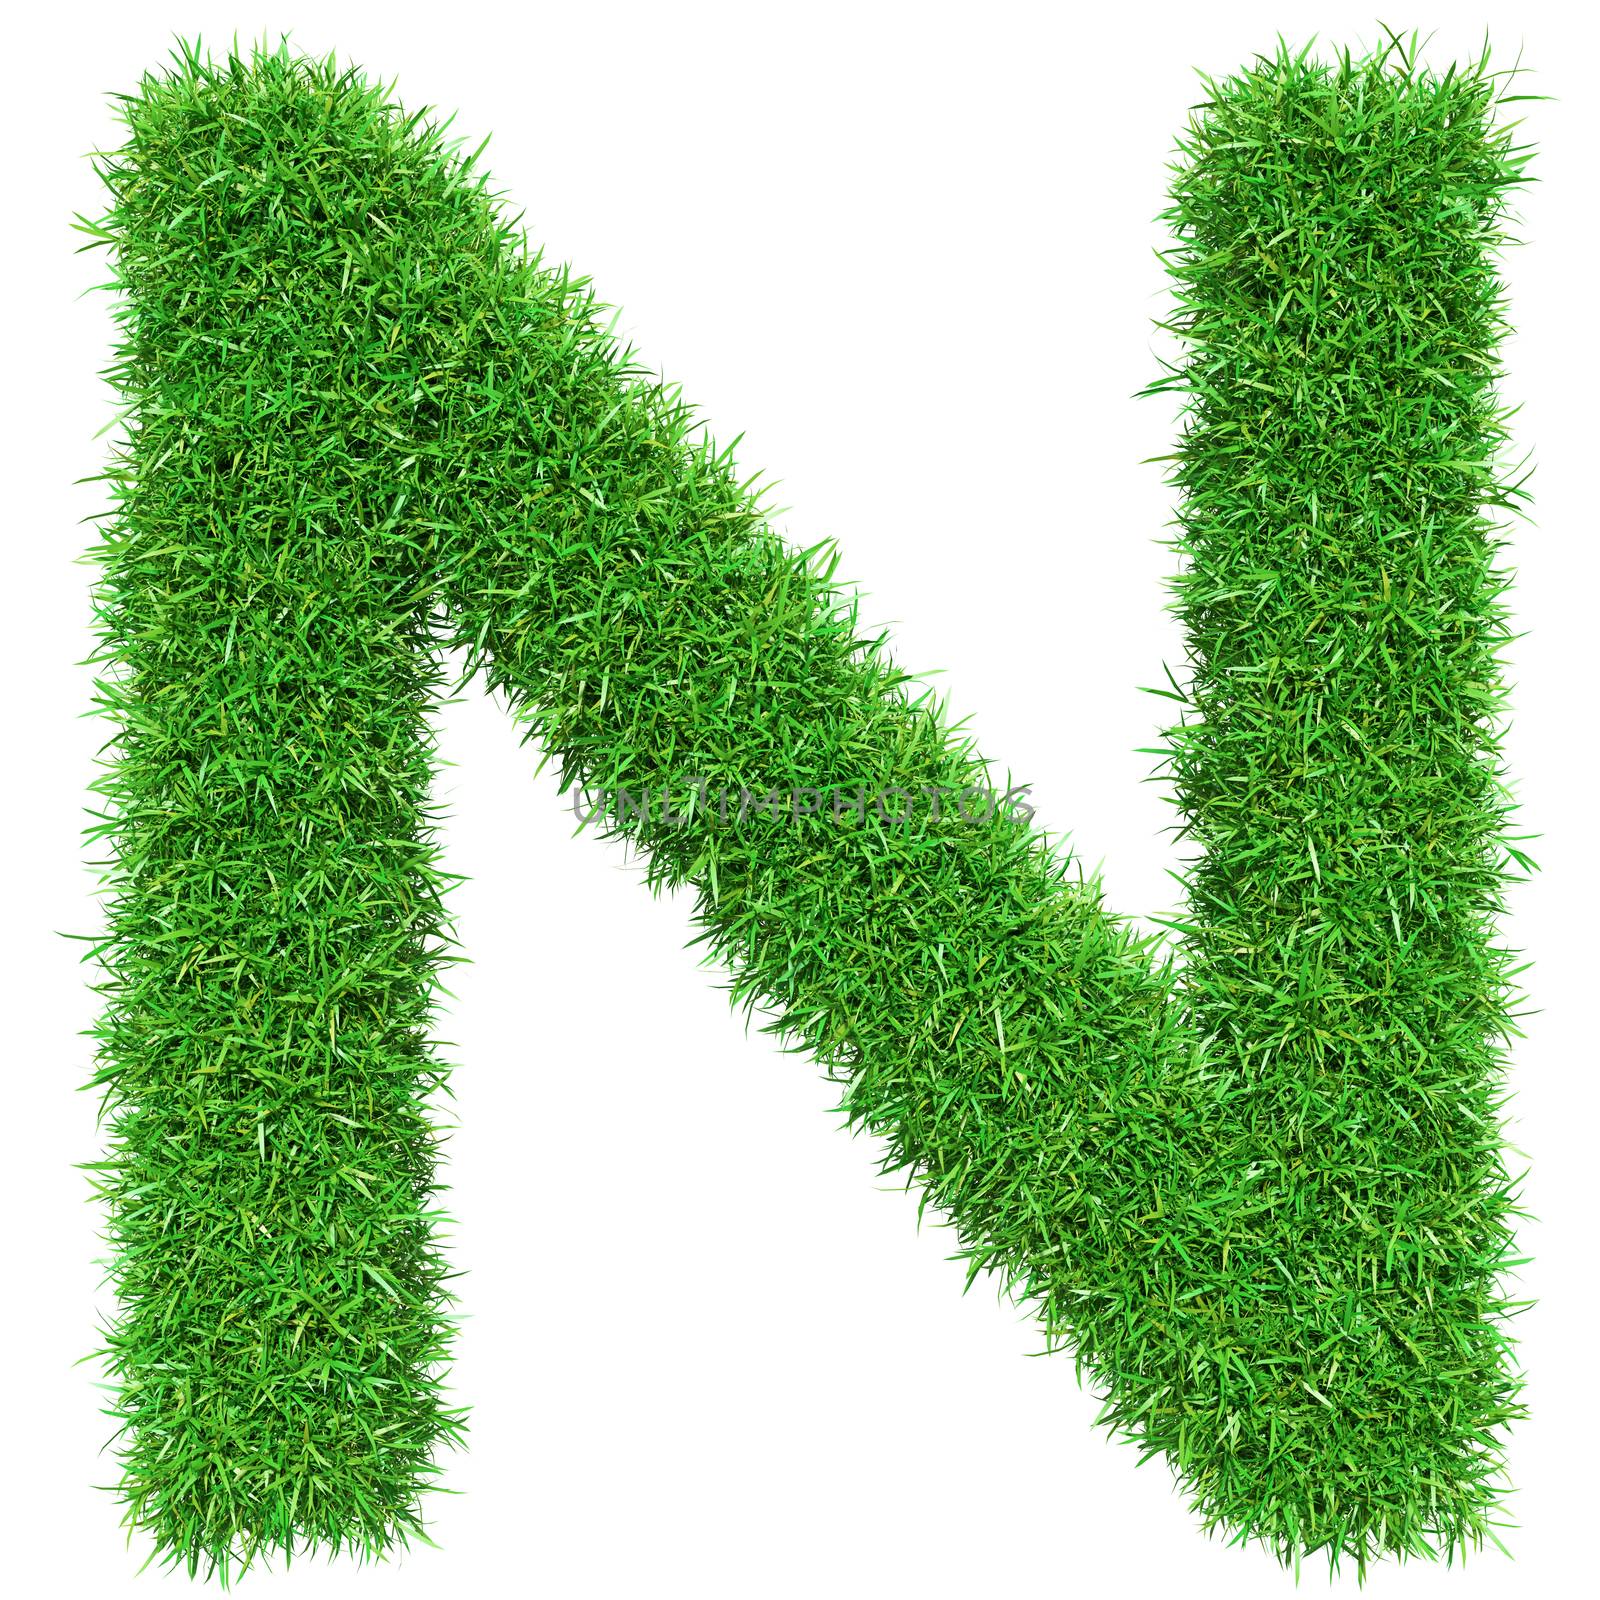 Green Grass Letter N. Isolated On White Background. Font For Your Design. 3D Illustration